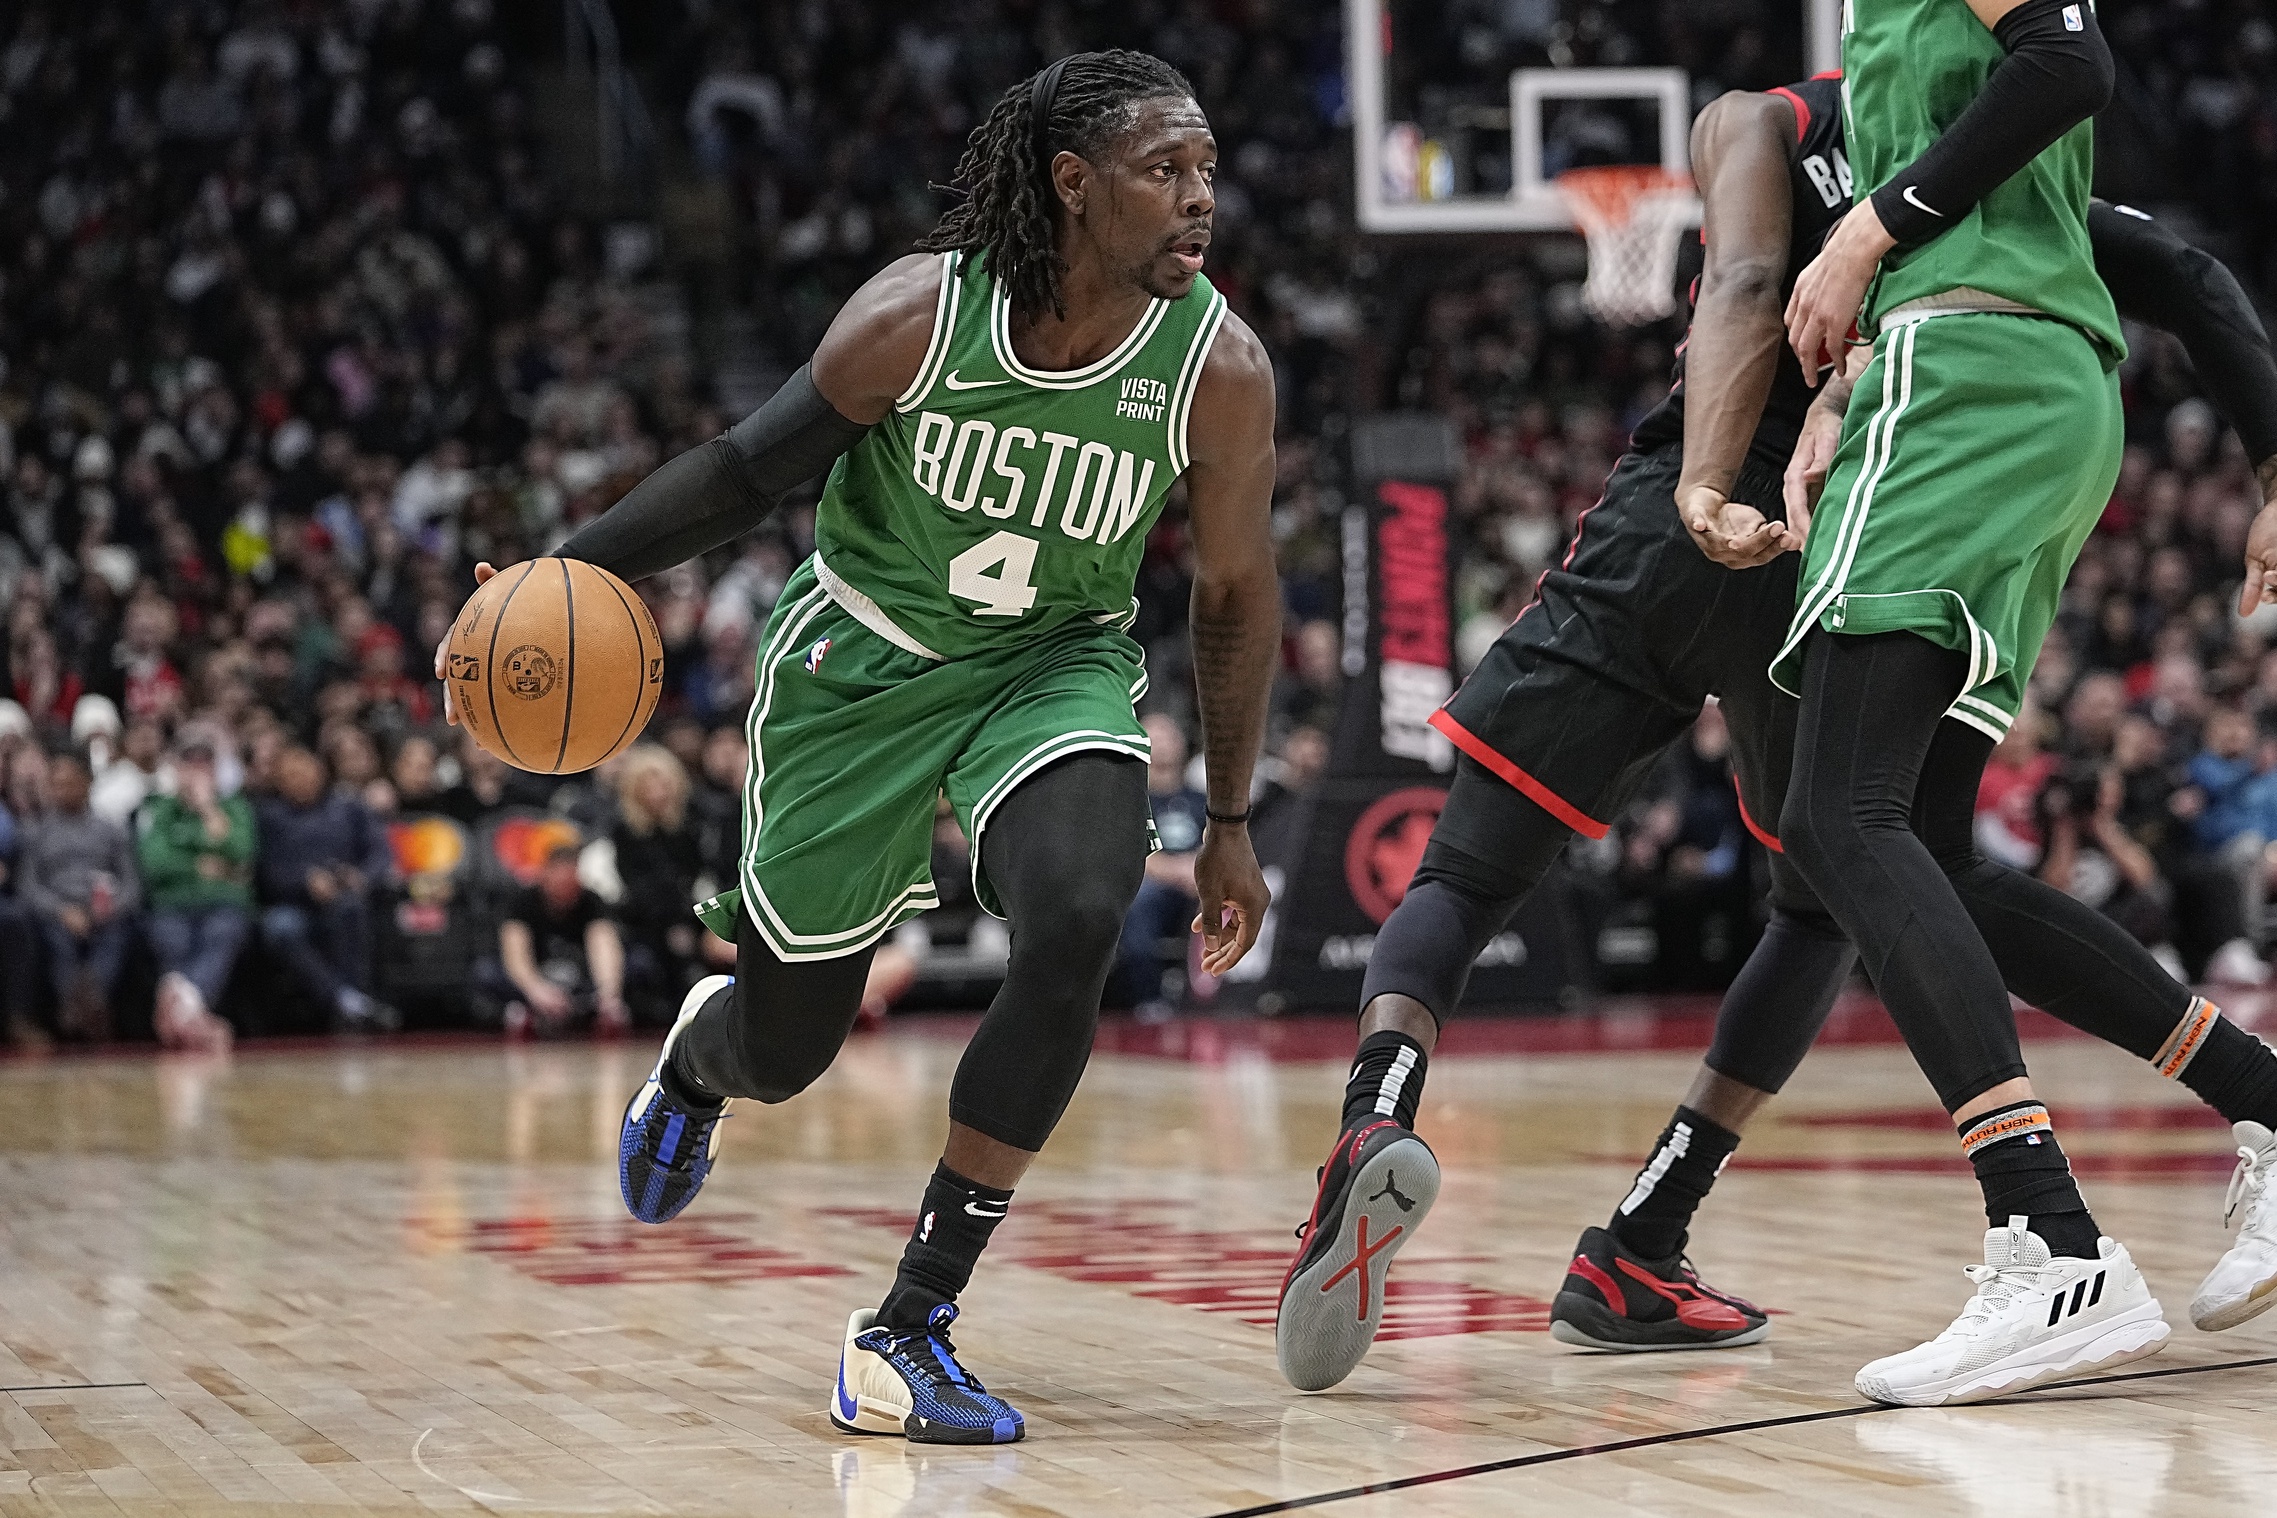 Boston Celtics guard Jrue Holiday (4) drives to the net against the Toronto Raptors during the first half at Scotiabank Arena.